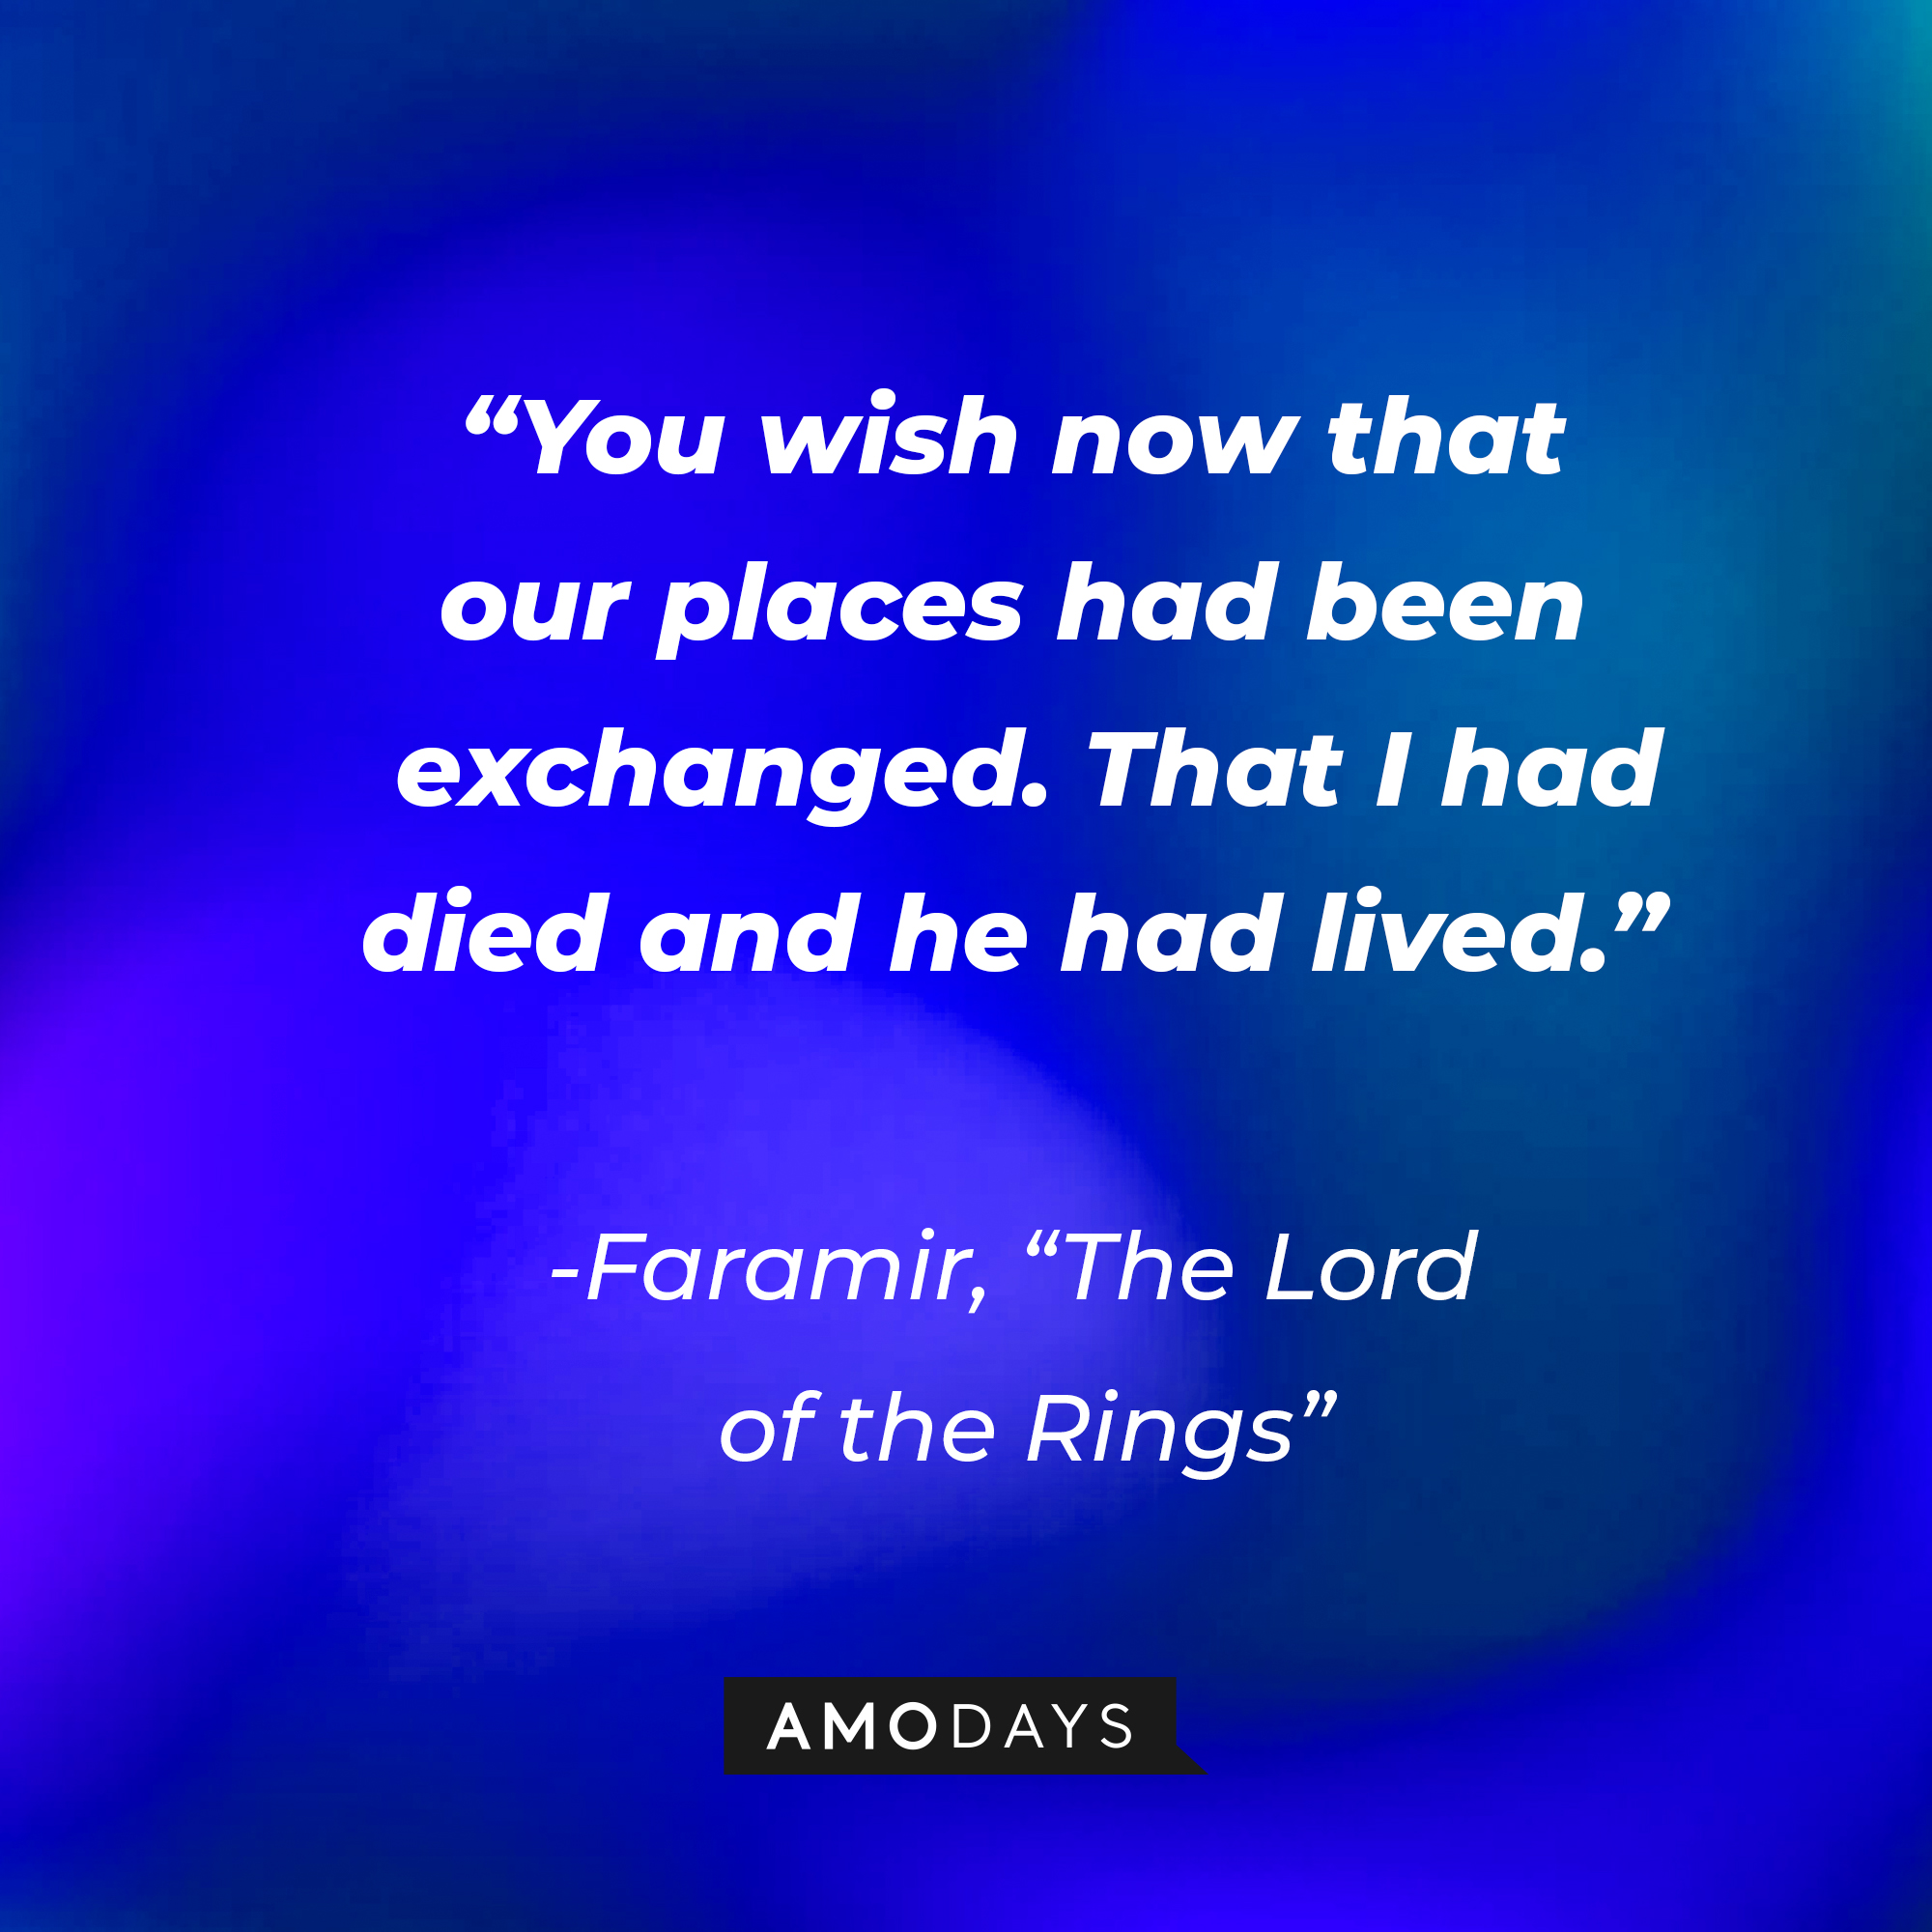 Faramir's quote from "The Lord of the Rings": "You wish now that our places had been exchanged. That I had died and he had lived." | Source: AmoDays